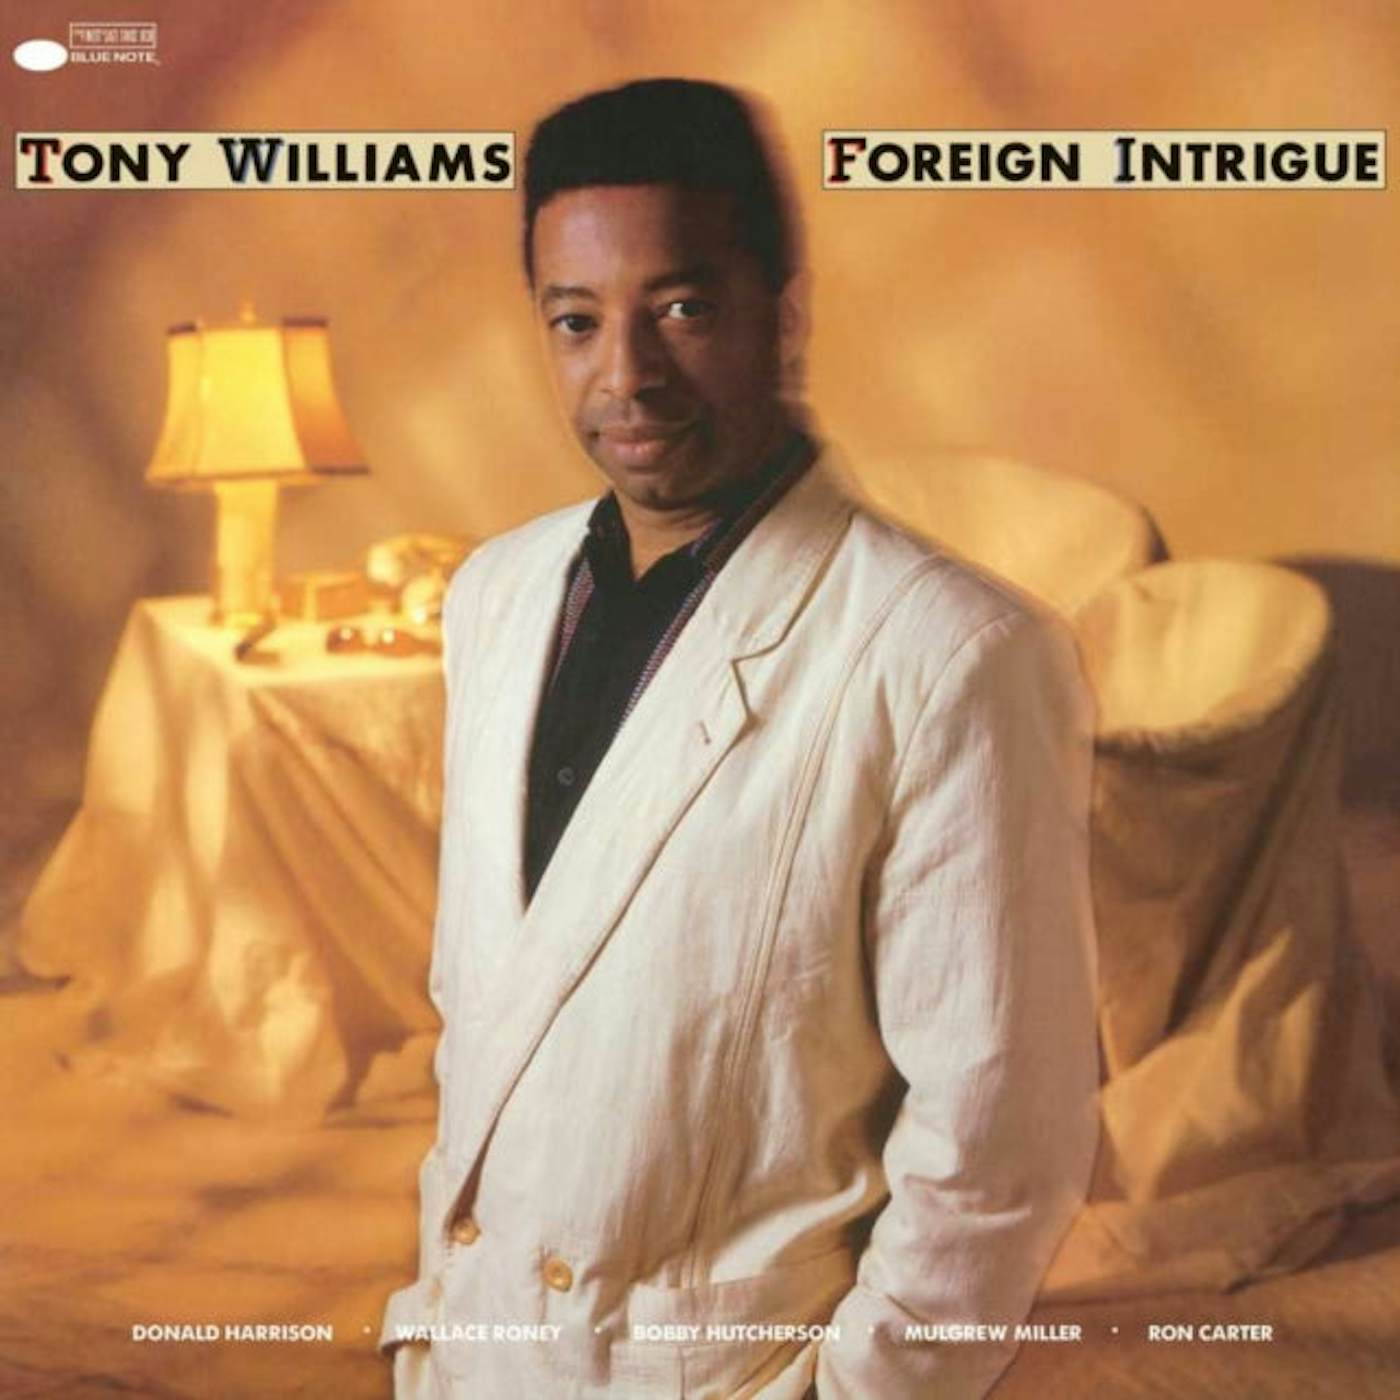 Tony Williams LP Vinyl Record - Foreign Intrigue